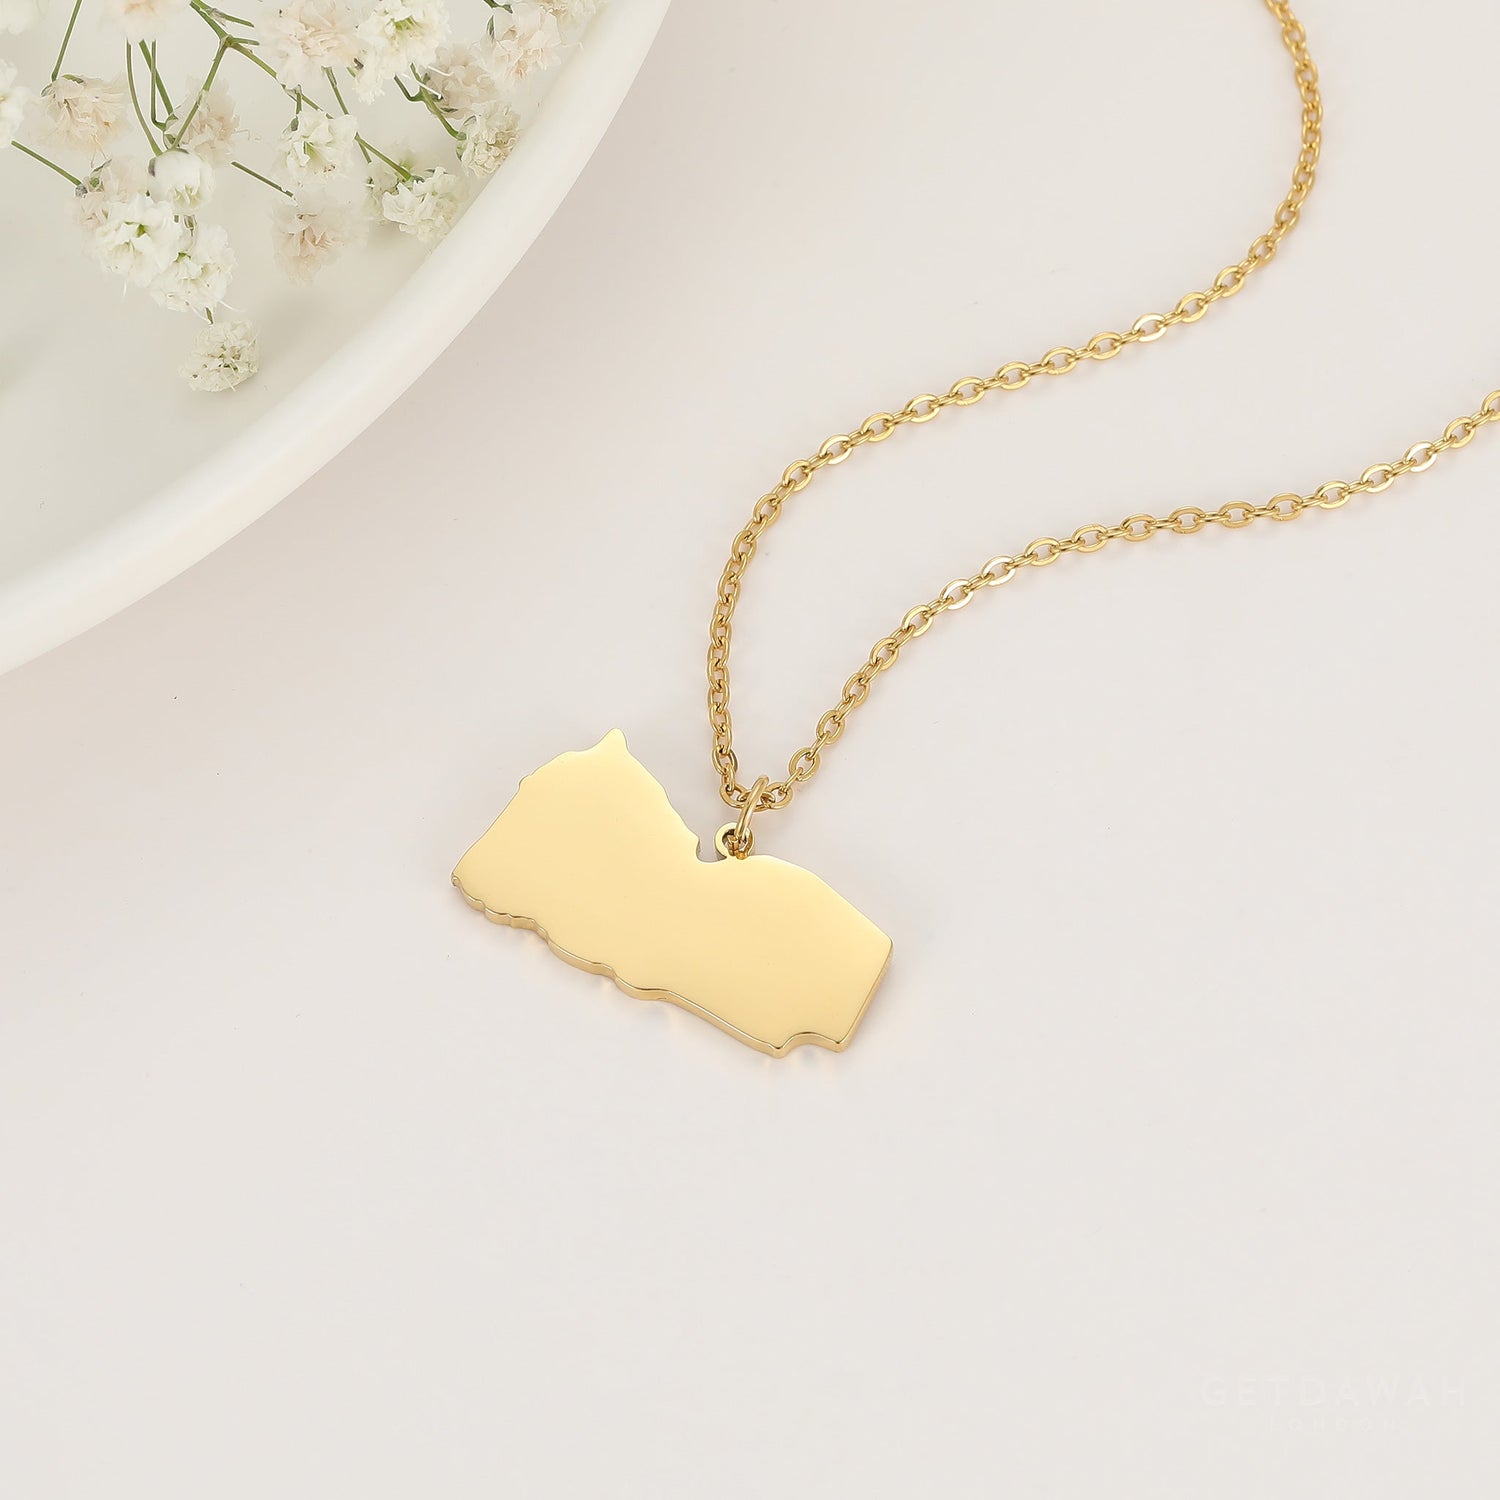 Country Map Necklaces